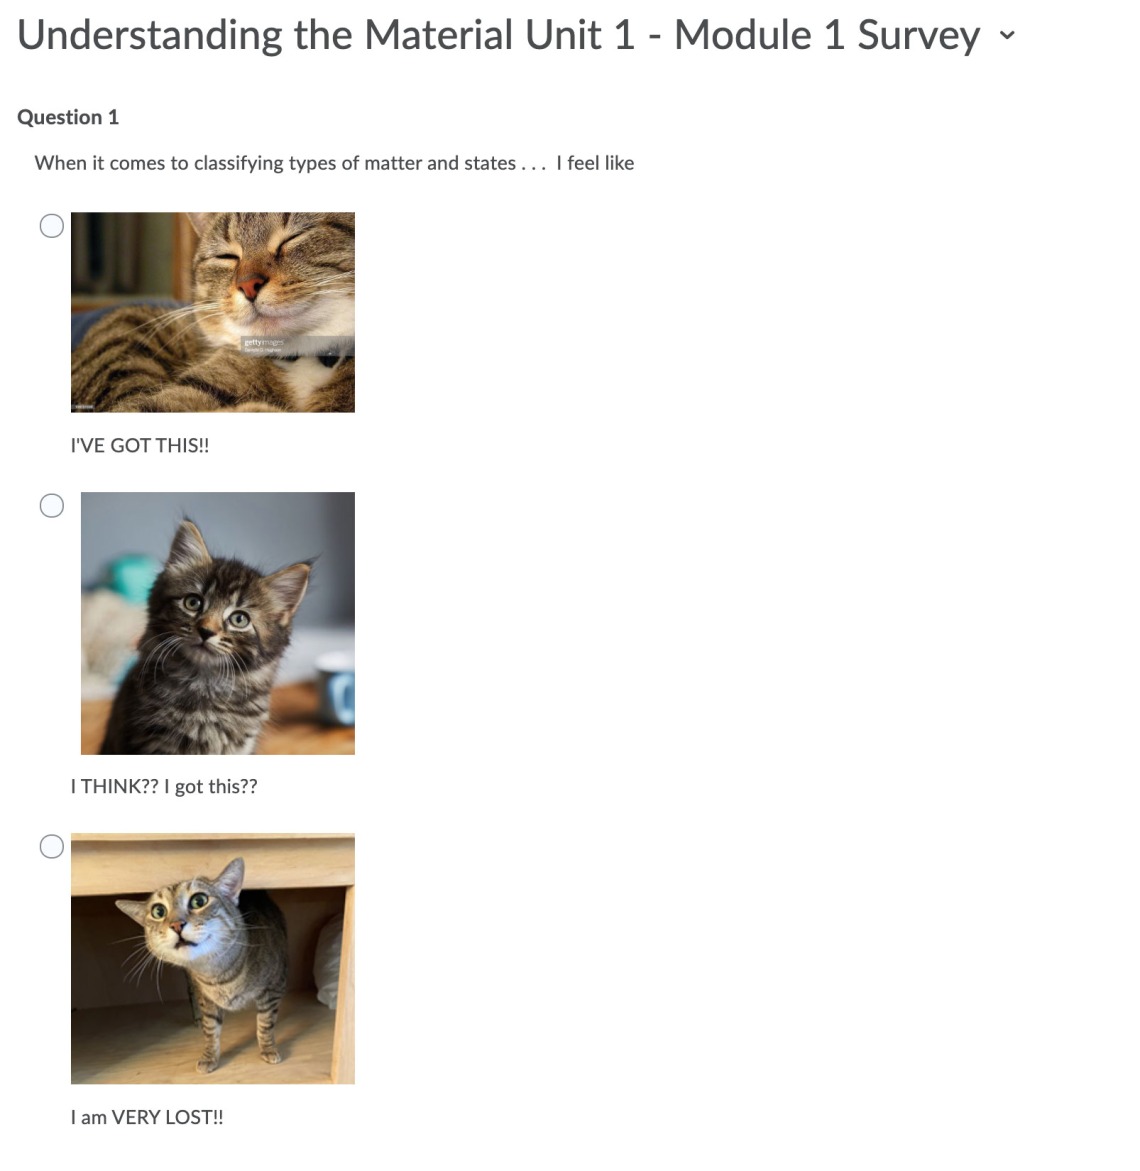 D2L Survey showing options using a combination of images and text